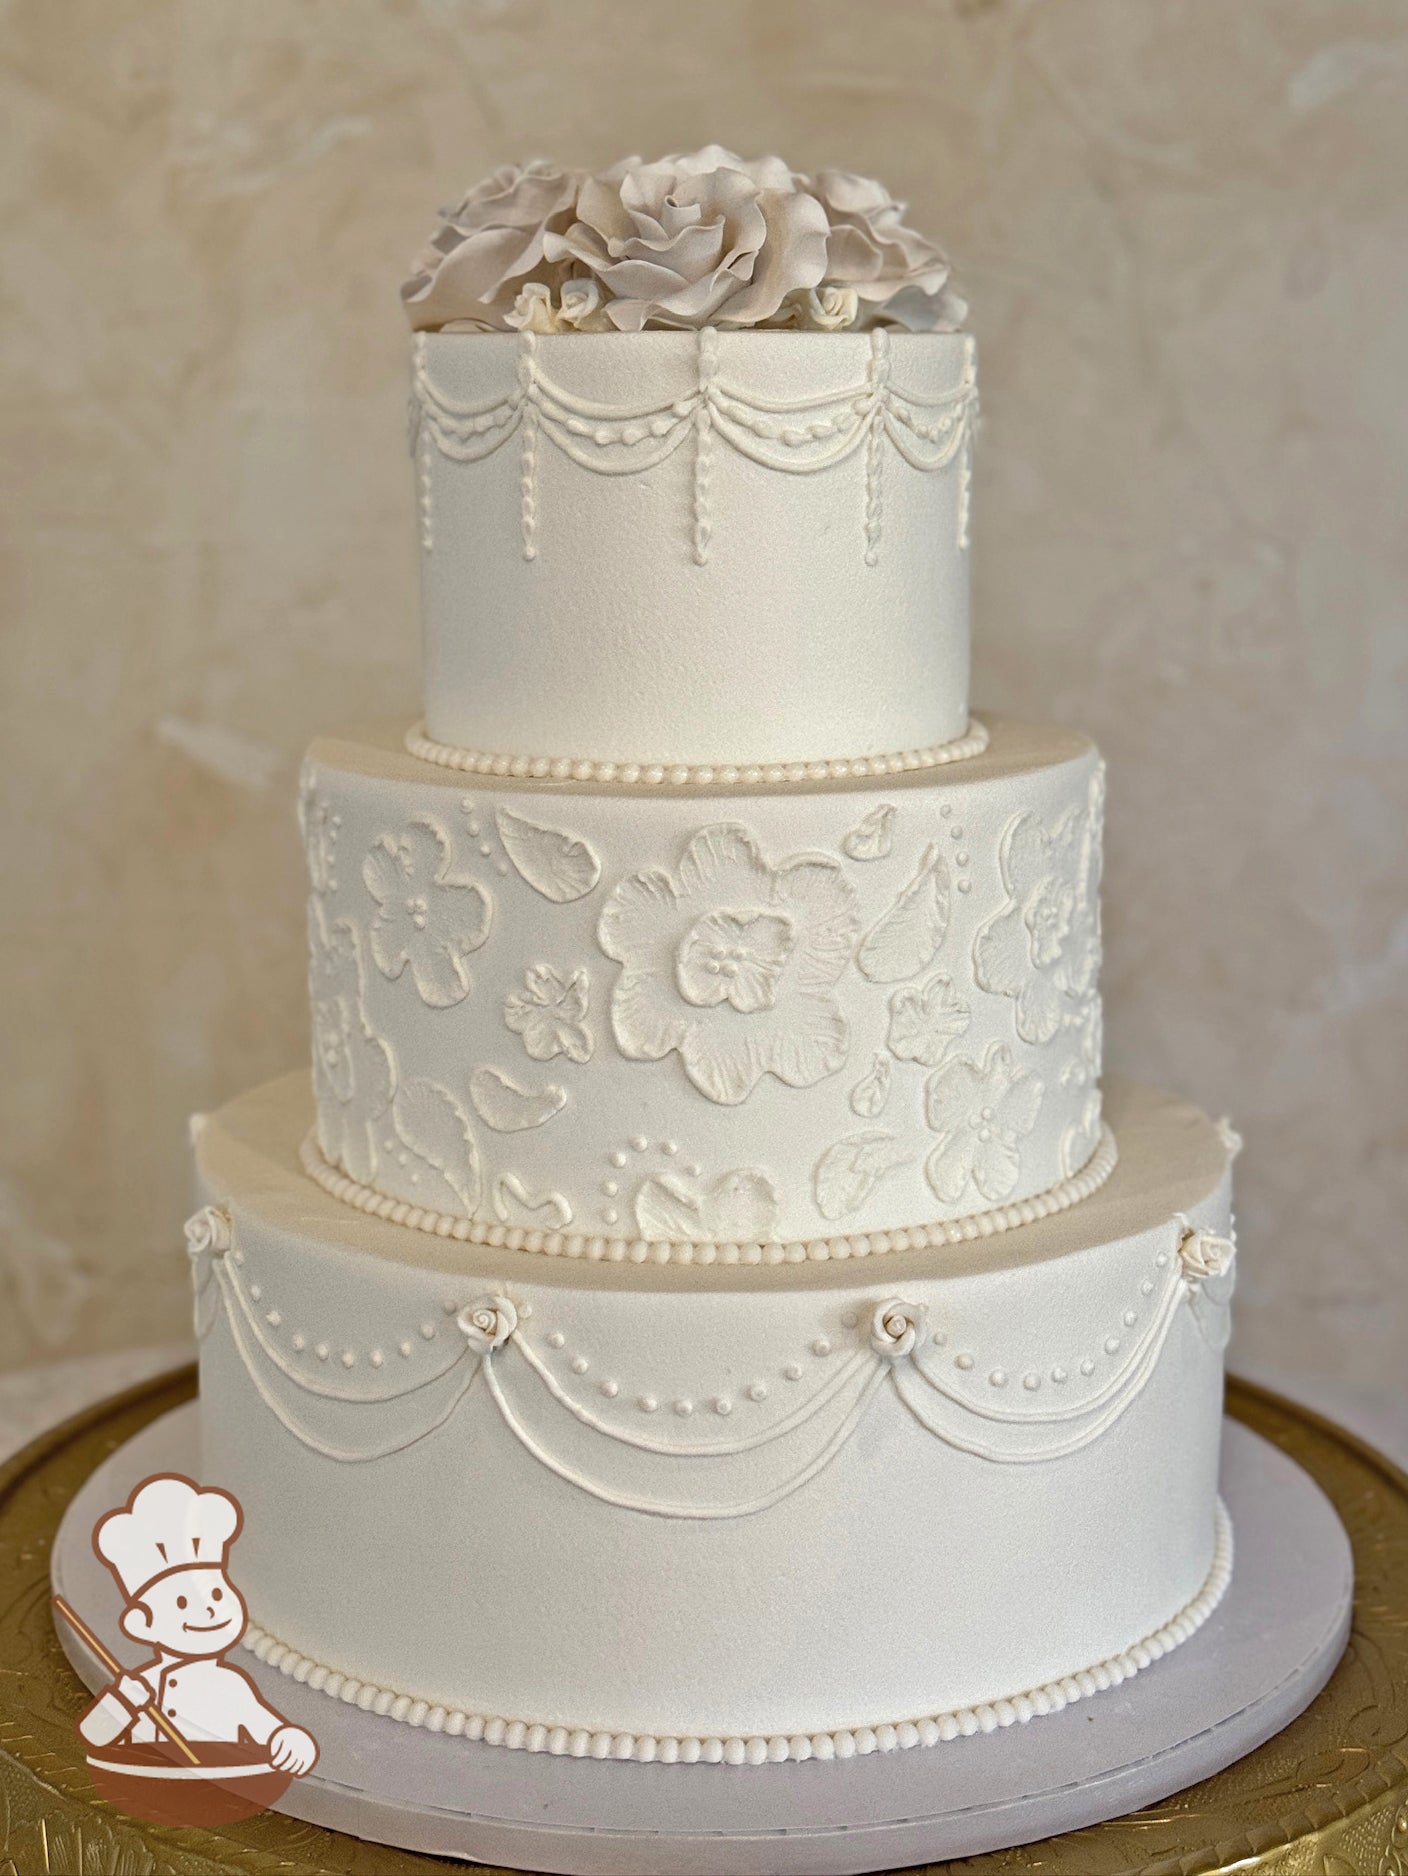 3 tier round wedding cake with brushed florals in middle tier and traditional piping on top & bottom tiers and finished with sugar flower topper.